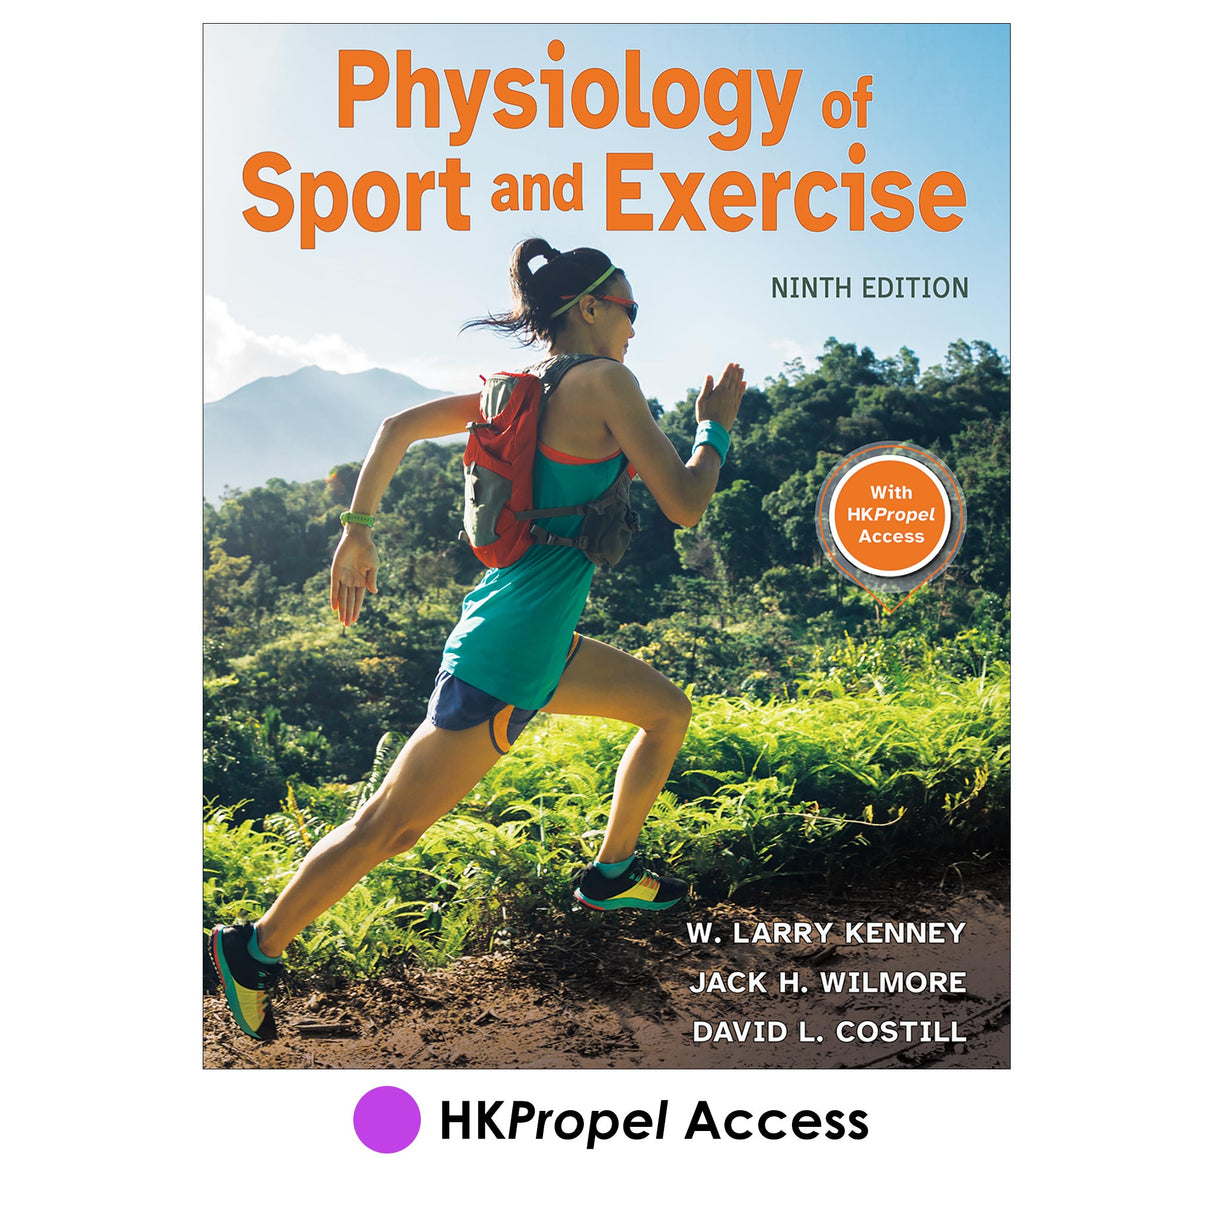 Physiology of Sport and Exercise 9th Edition HKPropel Access